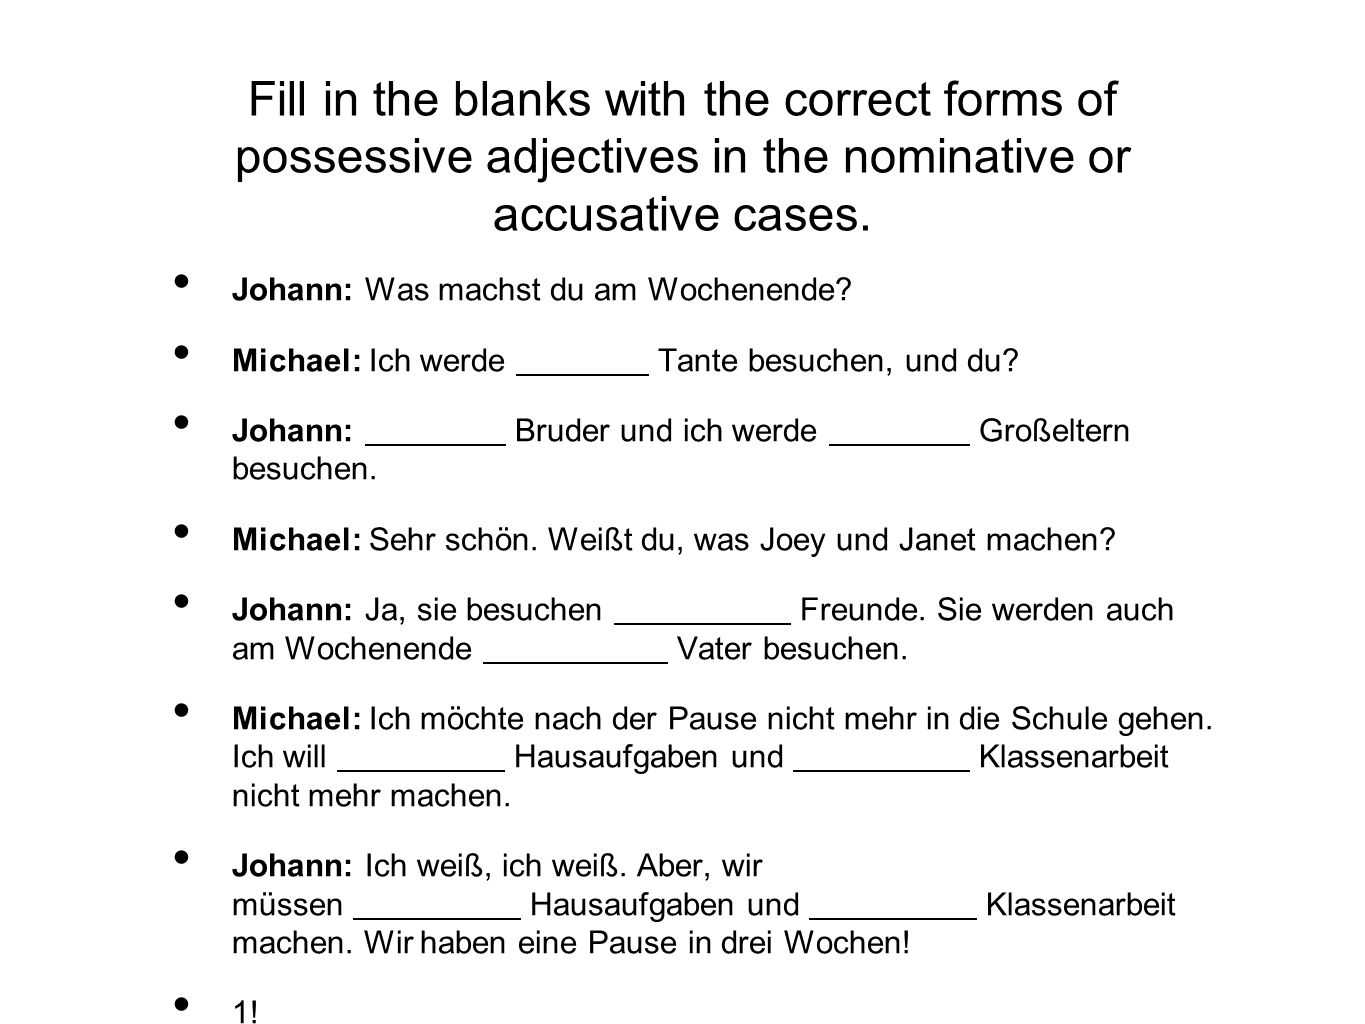 Fill in the blanks with the correct forms of possessive adjectives in the nominative or accusative cases.